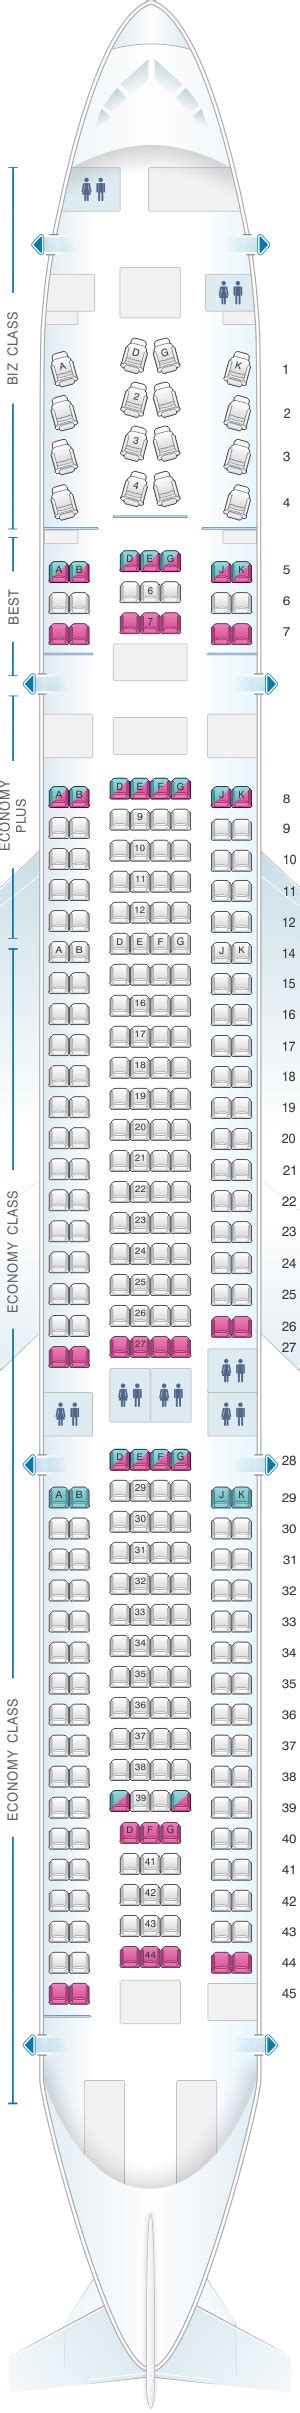 Airbus A330 300 Seating Chart Turkish Airlines Elcho Table